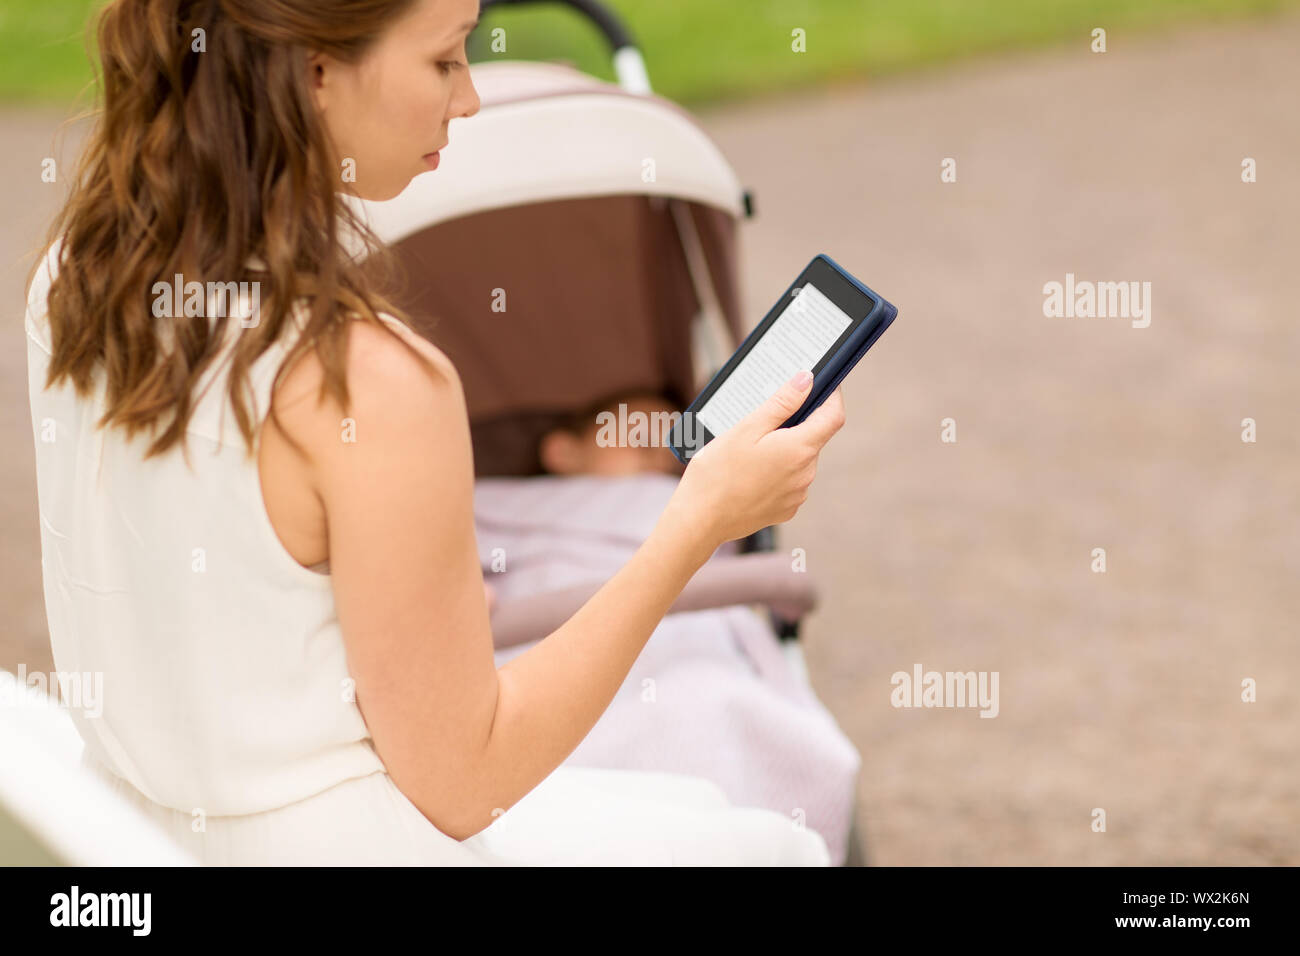 mother with stroller reading internet book at park Stock Photo